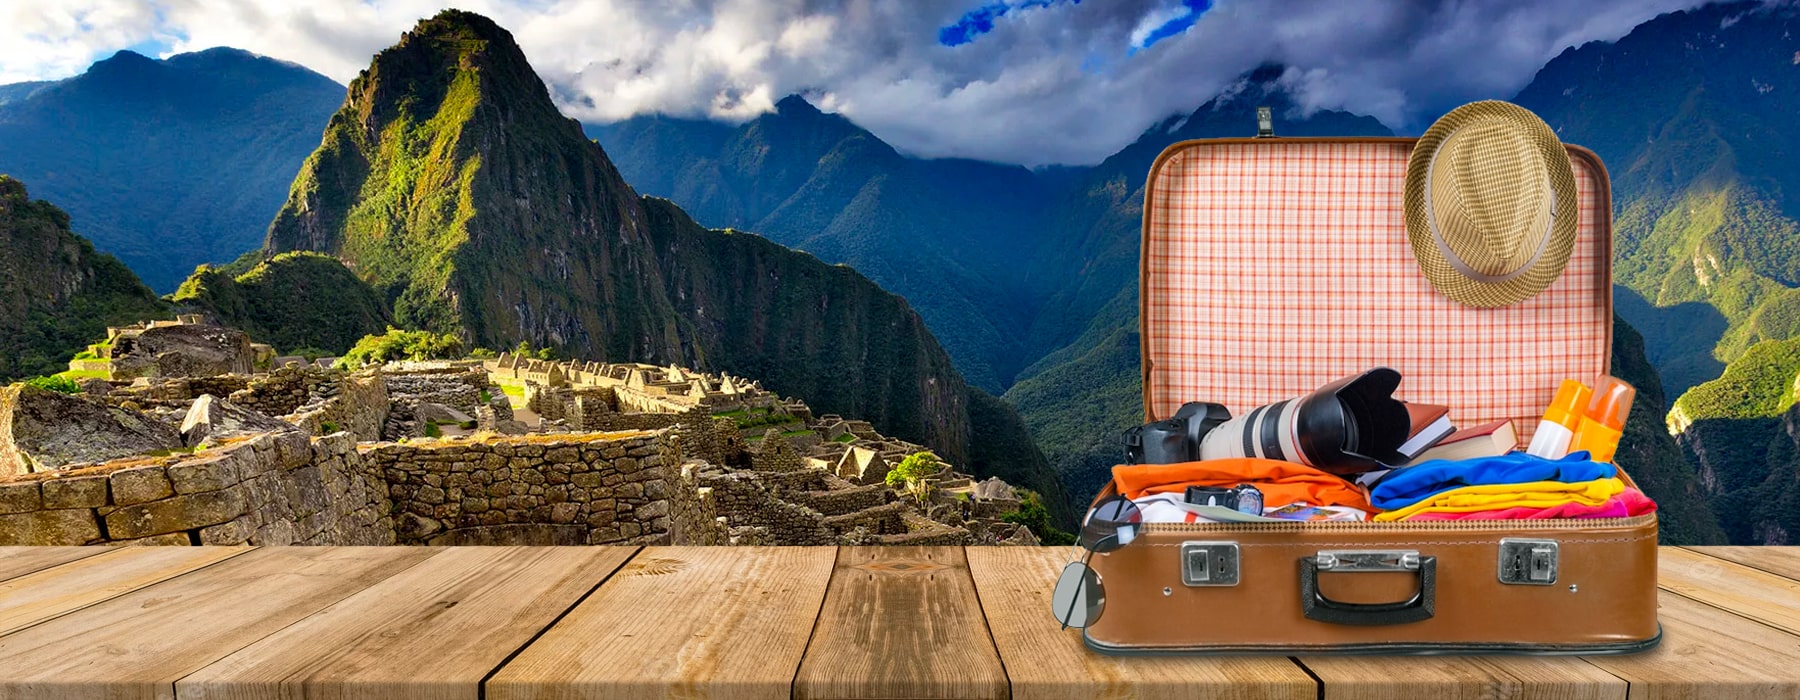 ULTIMATE PACKING LIST FOR YOUR TRIP TO PERU